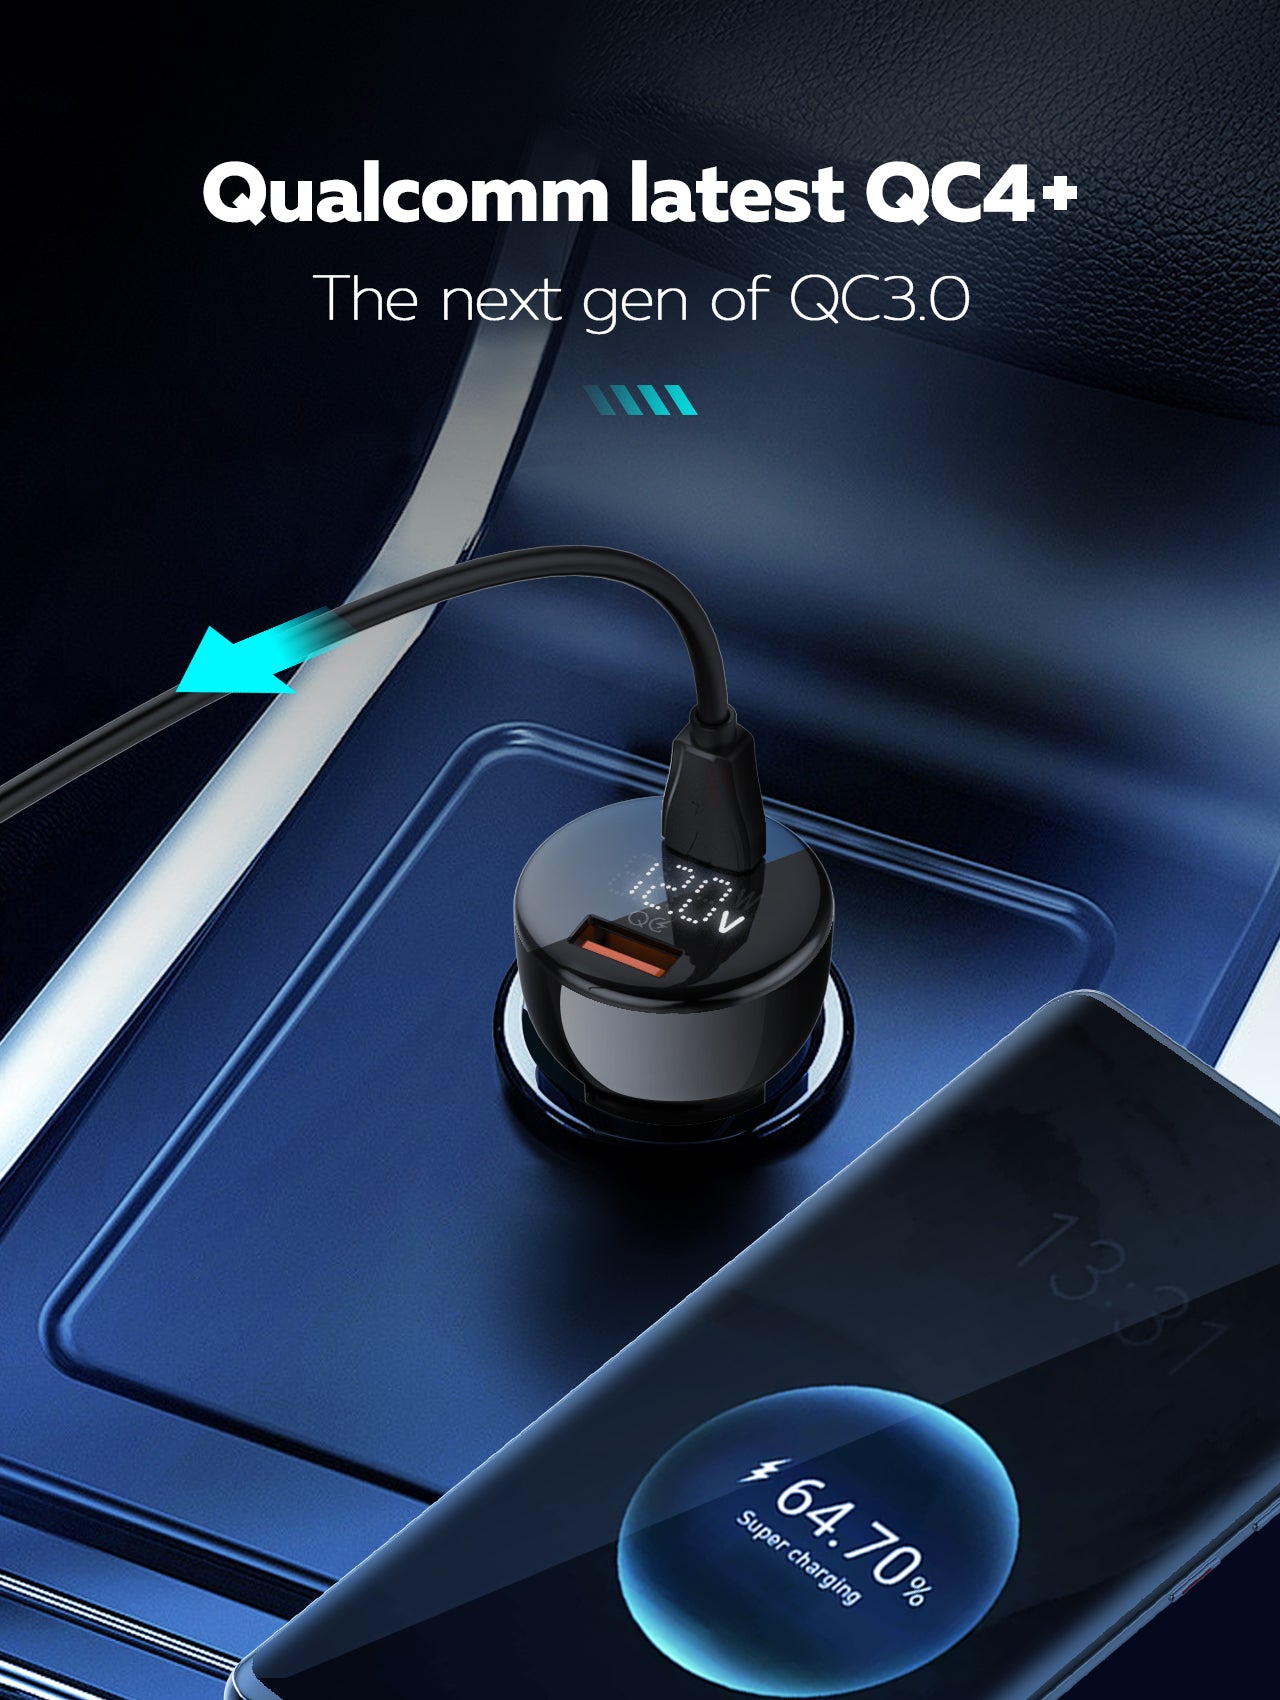 Glassology 100W Super Fast Car Charger with Type C & USB, Includes 100W USB C Cable - Ideal for Steam Deck, Macbook, Laptops, Tablets, iPhone, Samsung, Huawei, Xiaomi, and more.